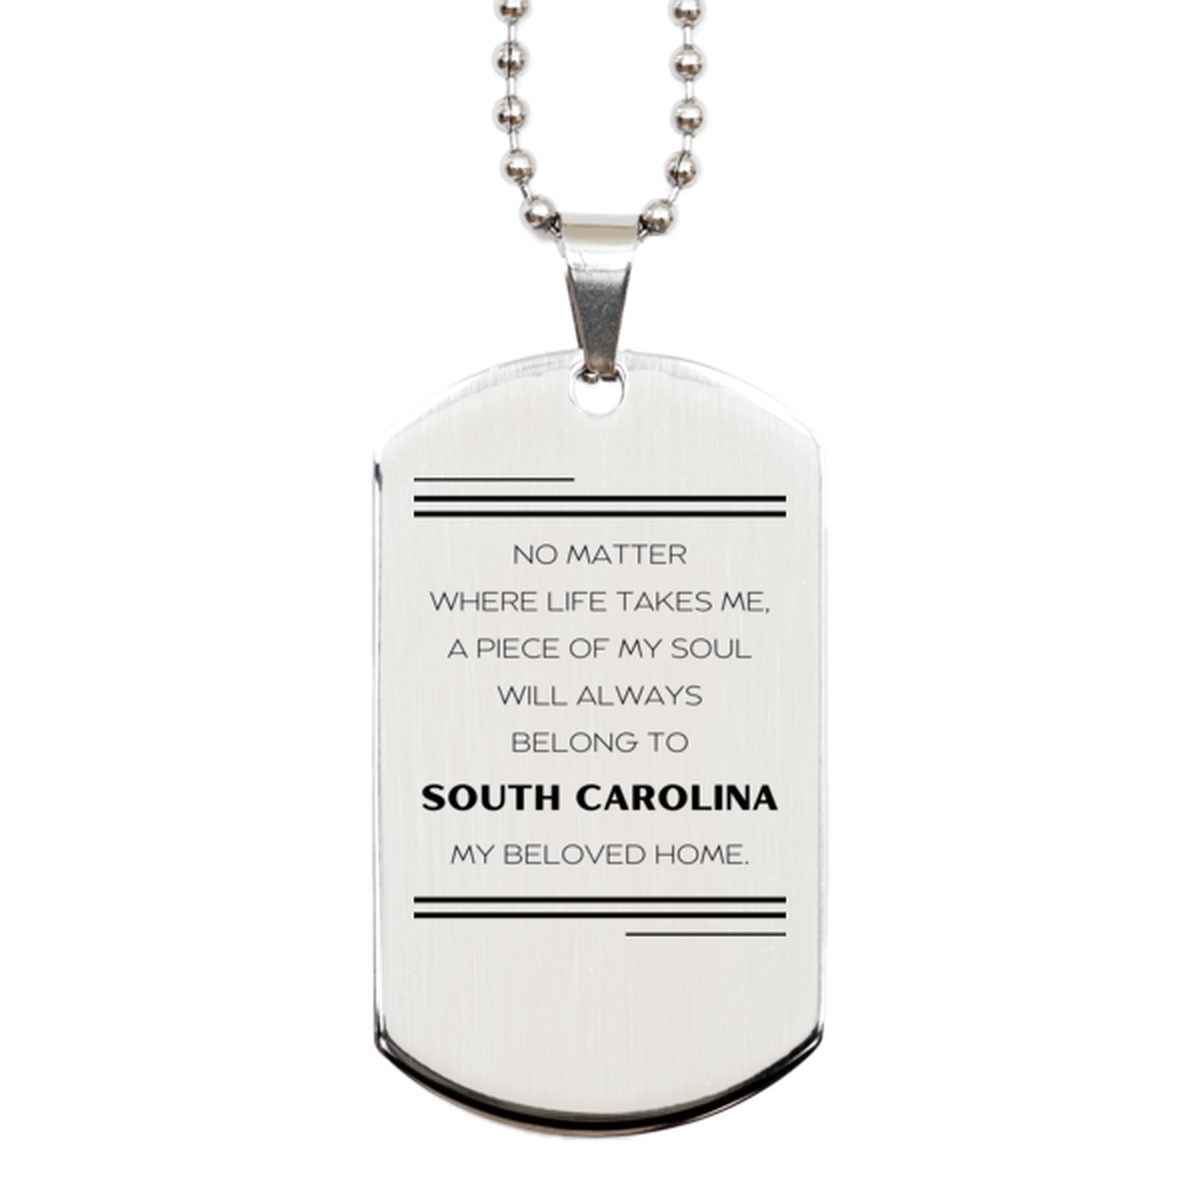 Love South Carolina State Gifts, My soul will always belong to South Carolina, Proud Silver Dog Tag, Birthday Unique Gifts For South Carolina Men, Women, Friends